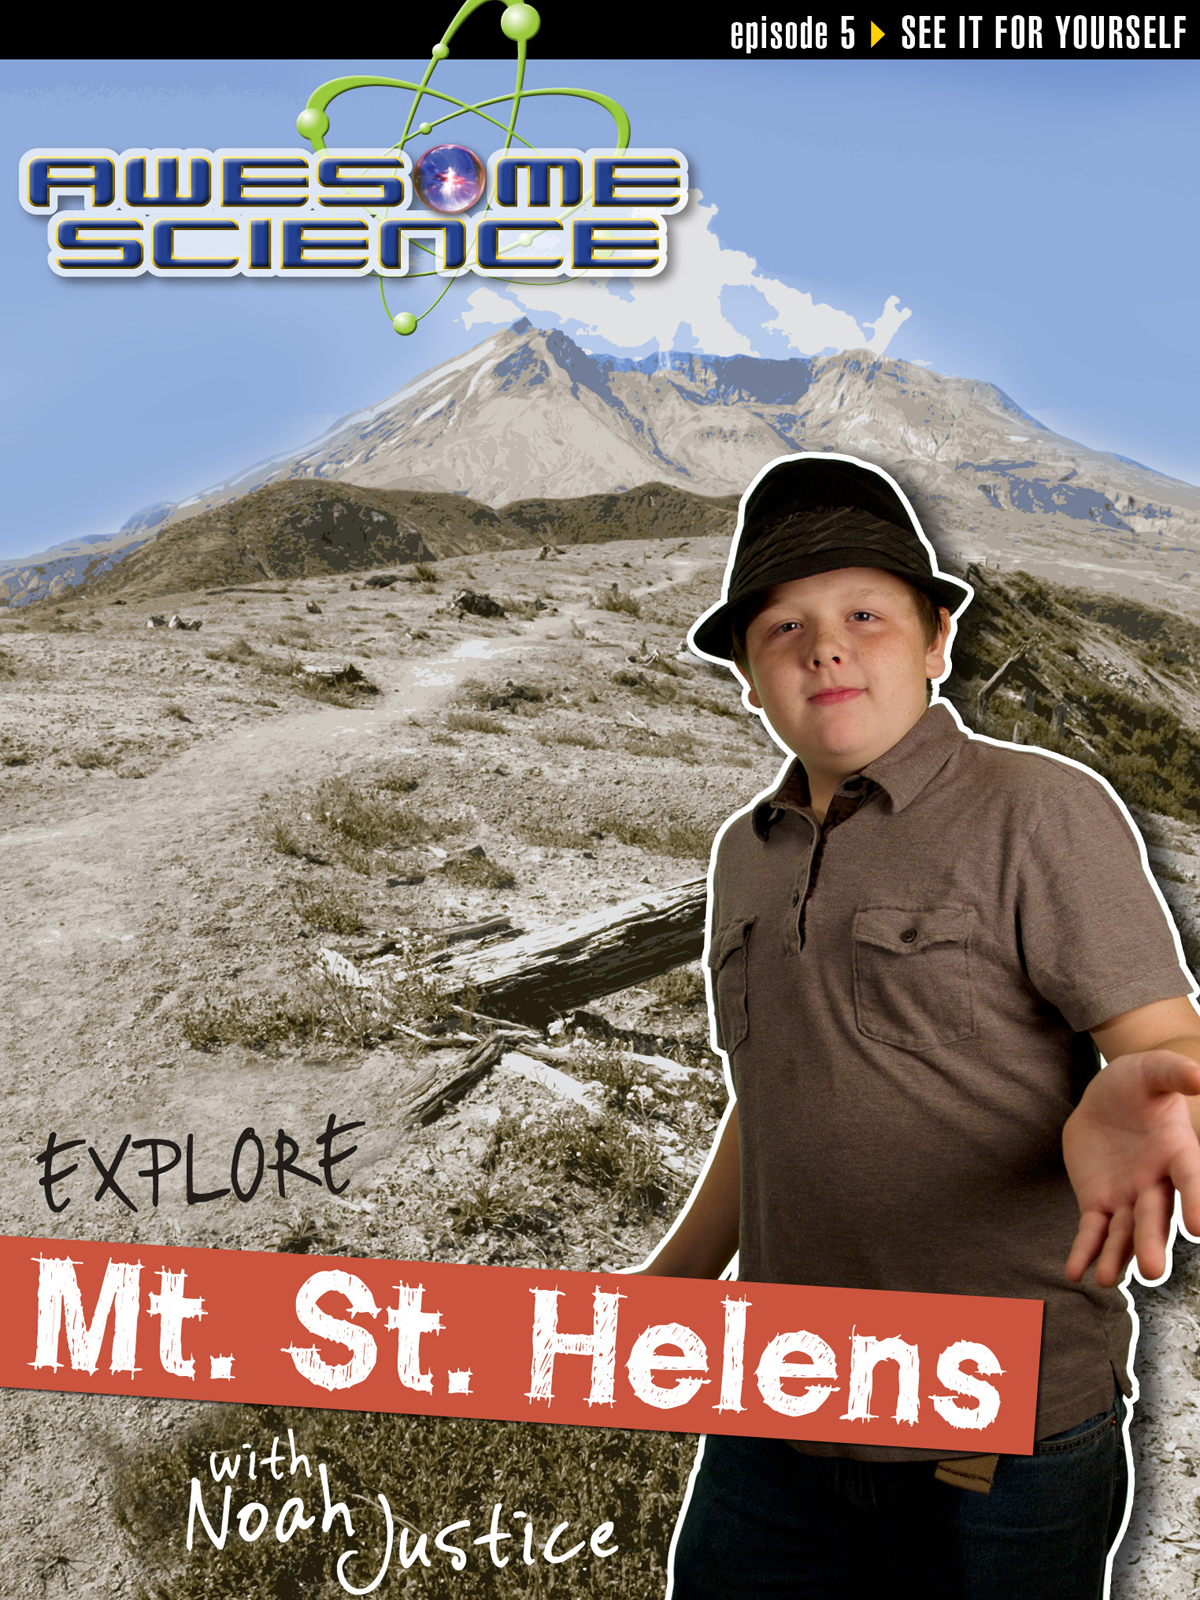 Awesome Science: Explore Mount St. Helens